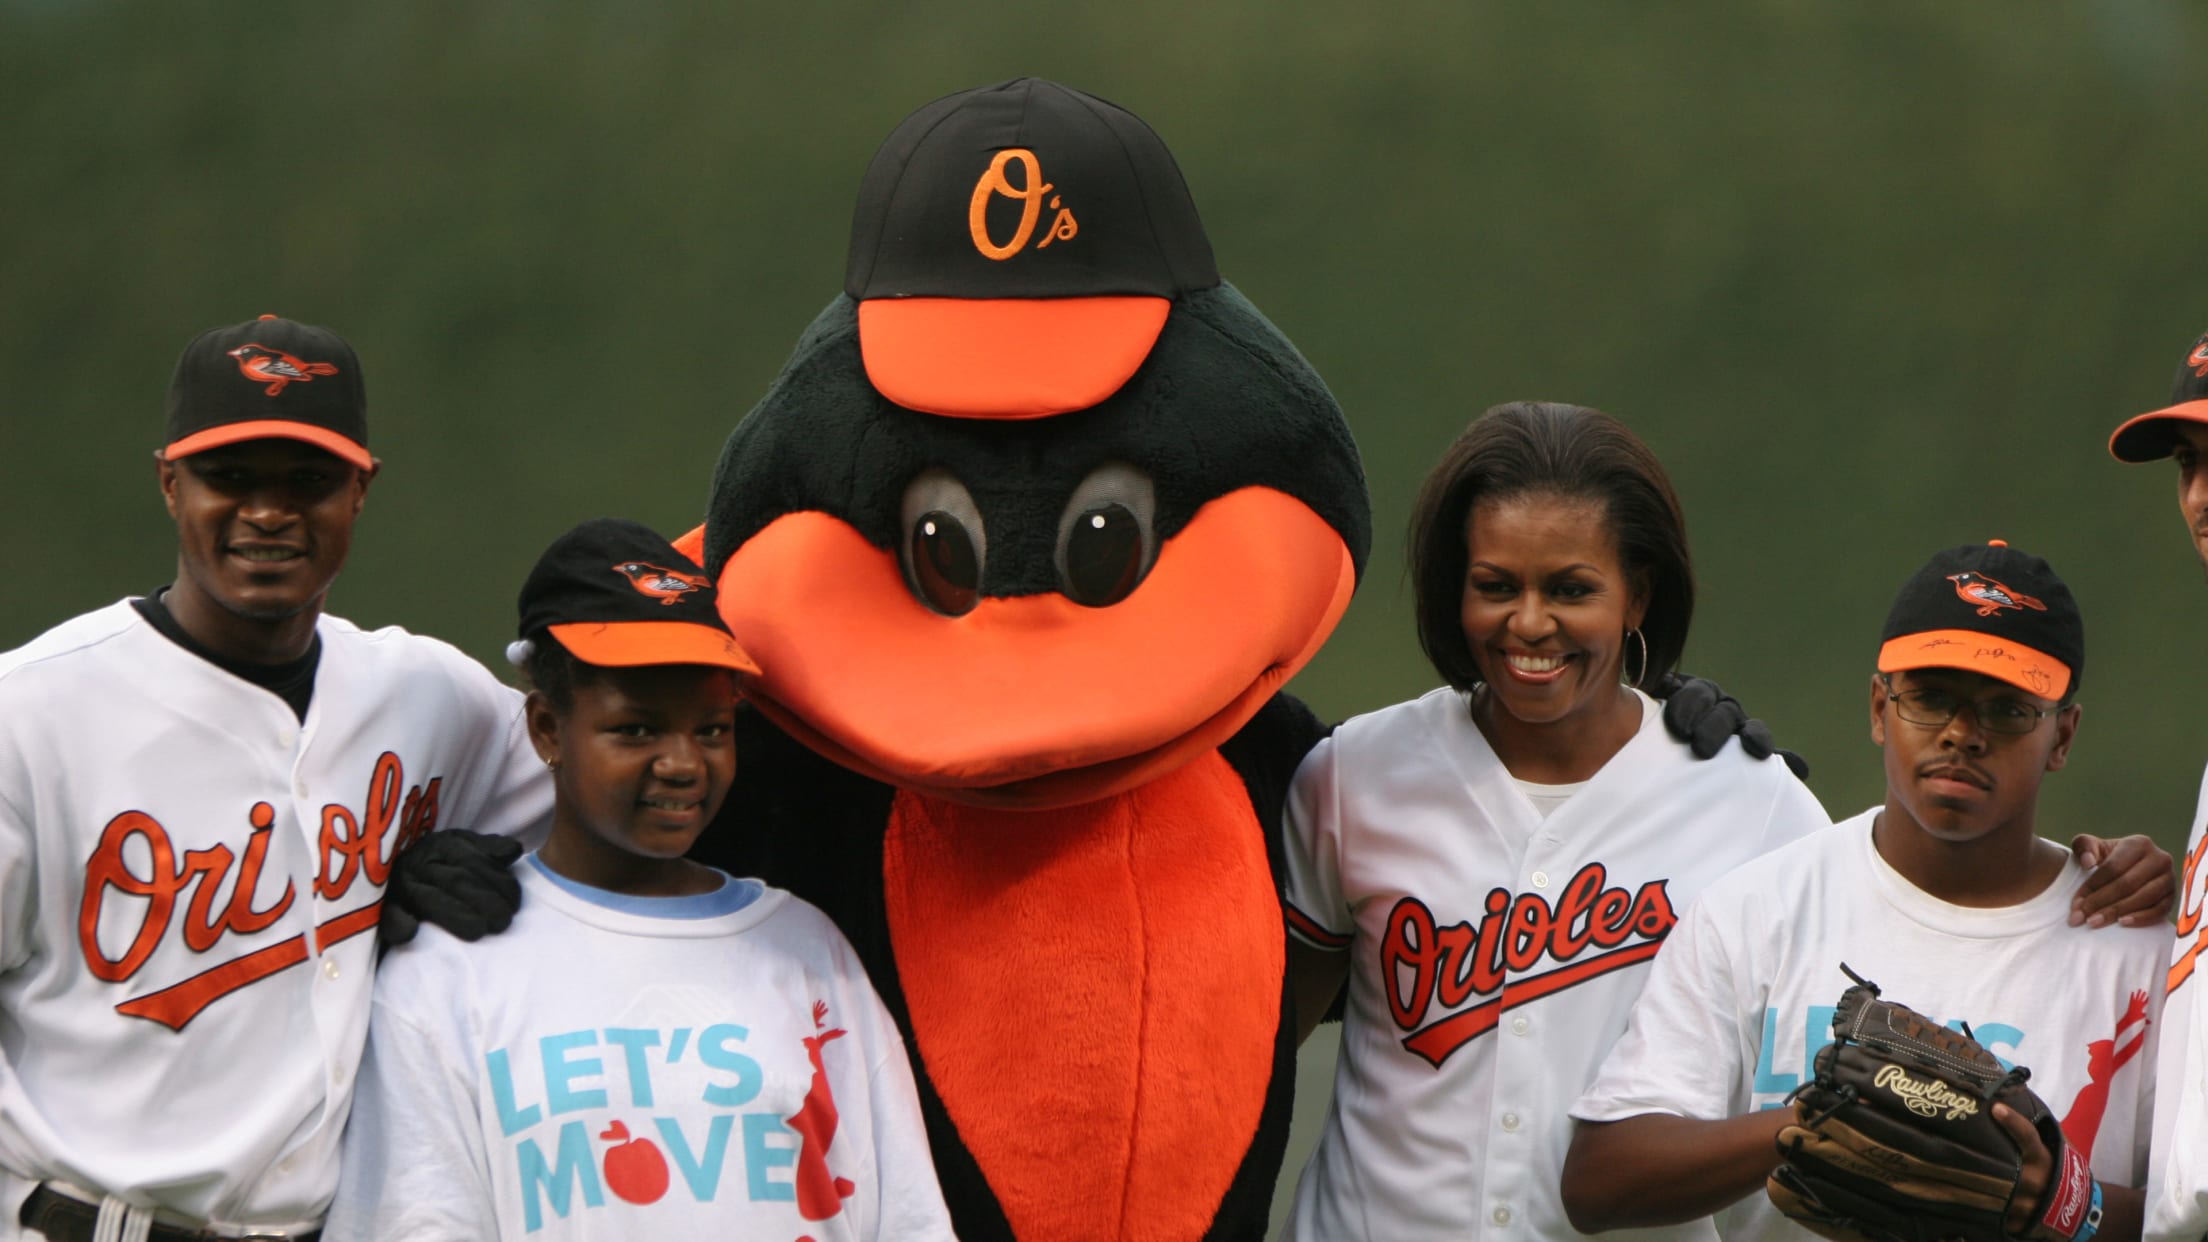 Orioles Bird Named Finalist For Mascot Hall Of Fame 2020 - CBS